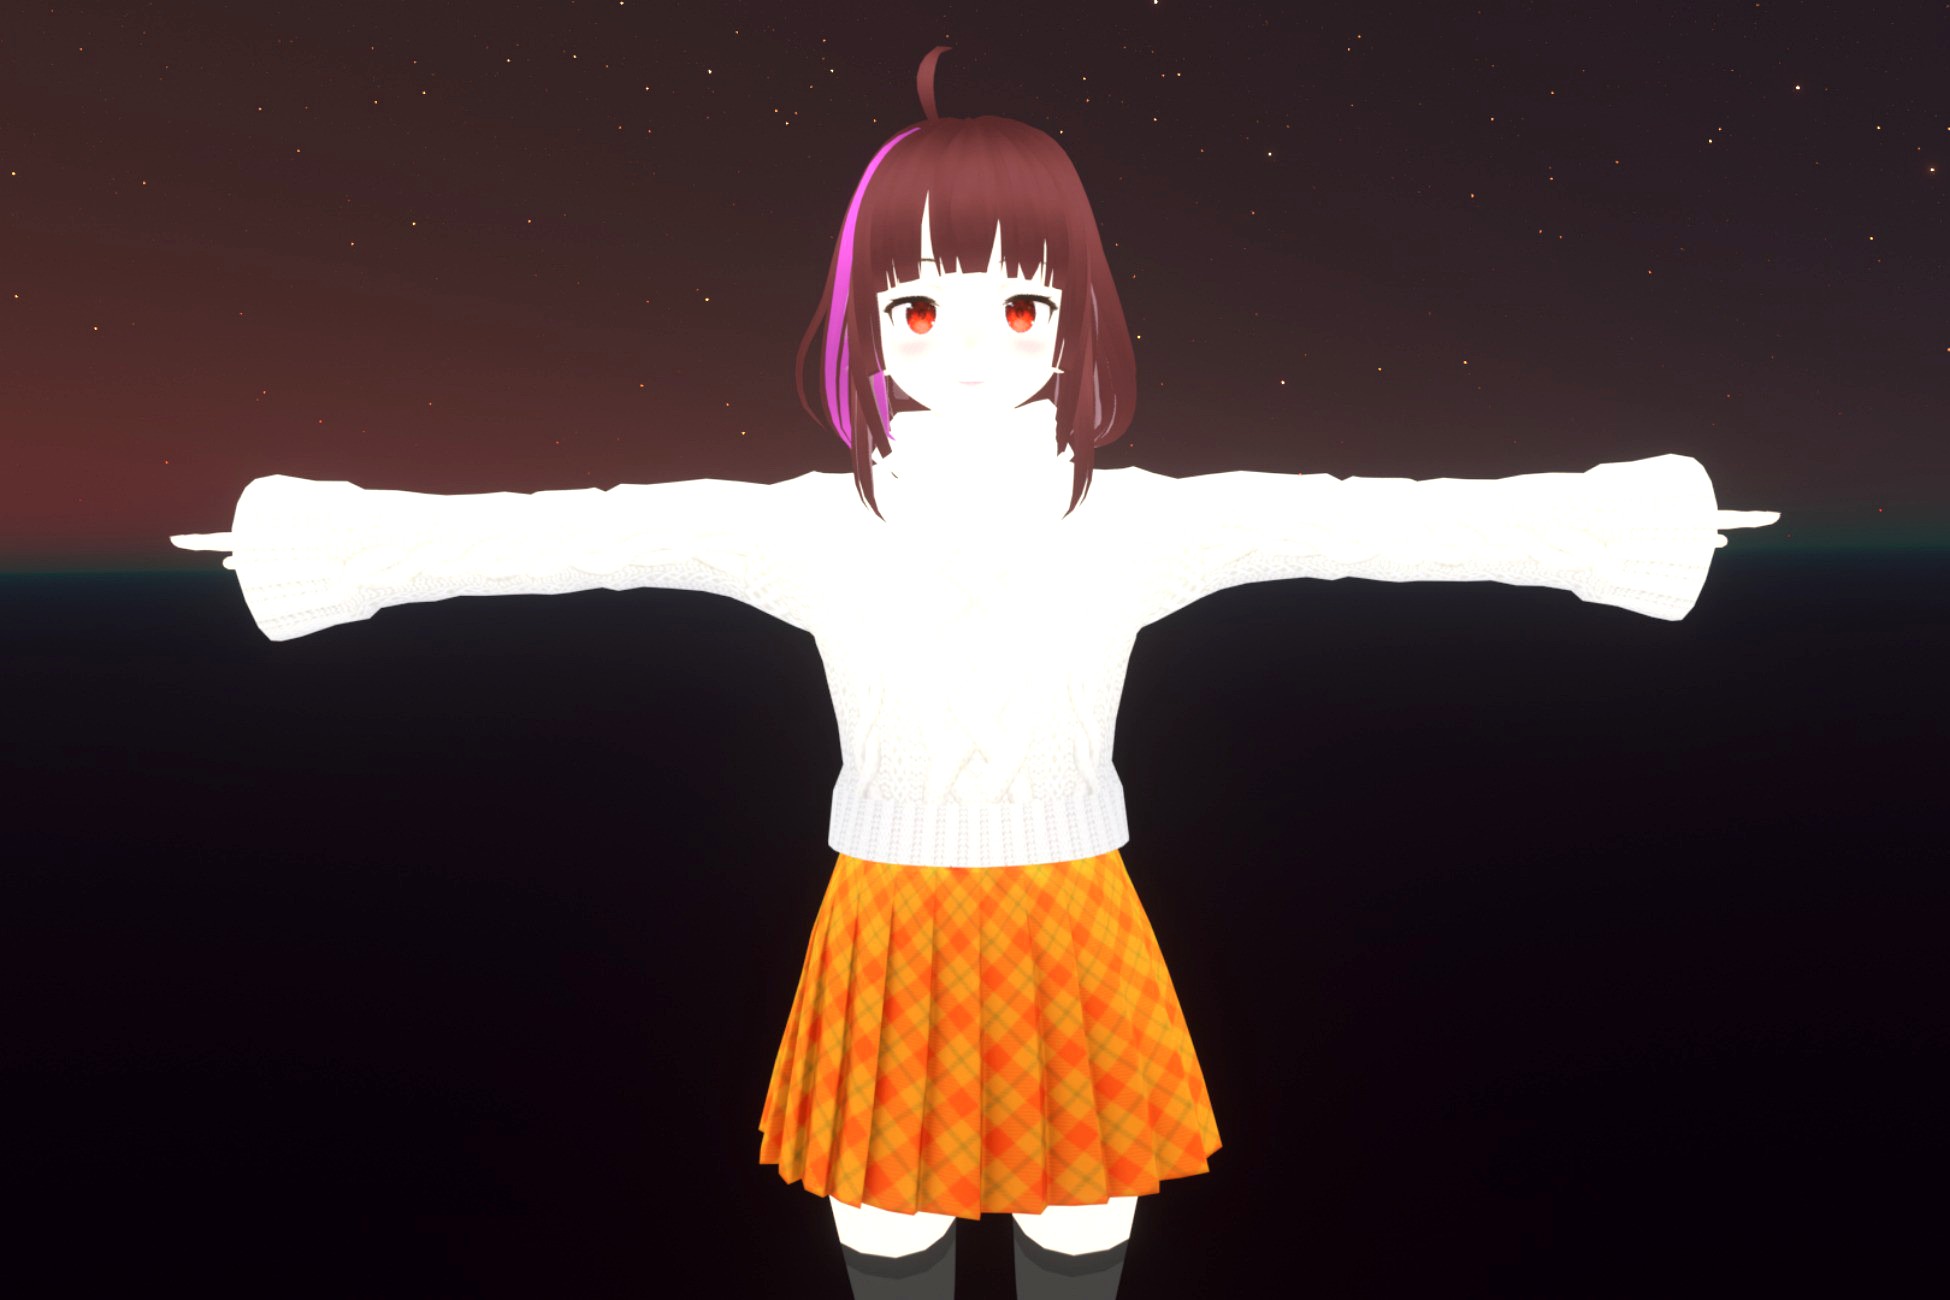 Cute Anime Girl Game Ready Low poly 3D model - Keiko